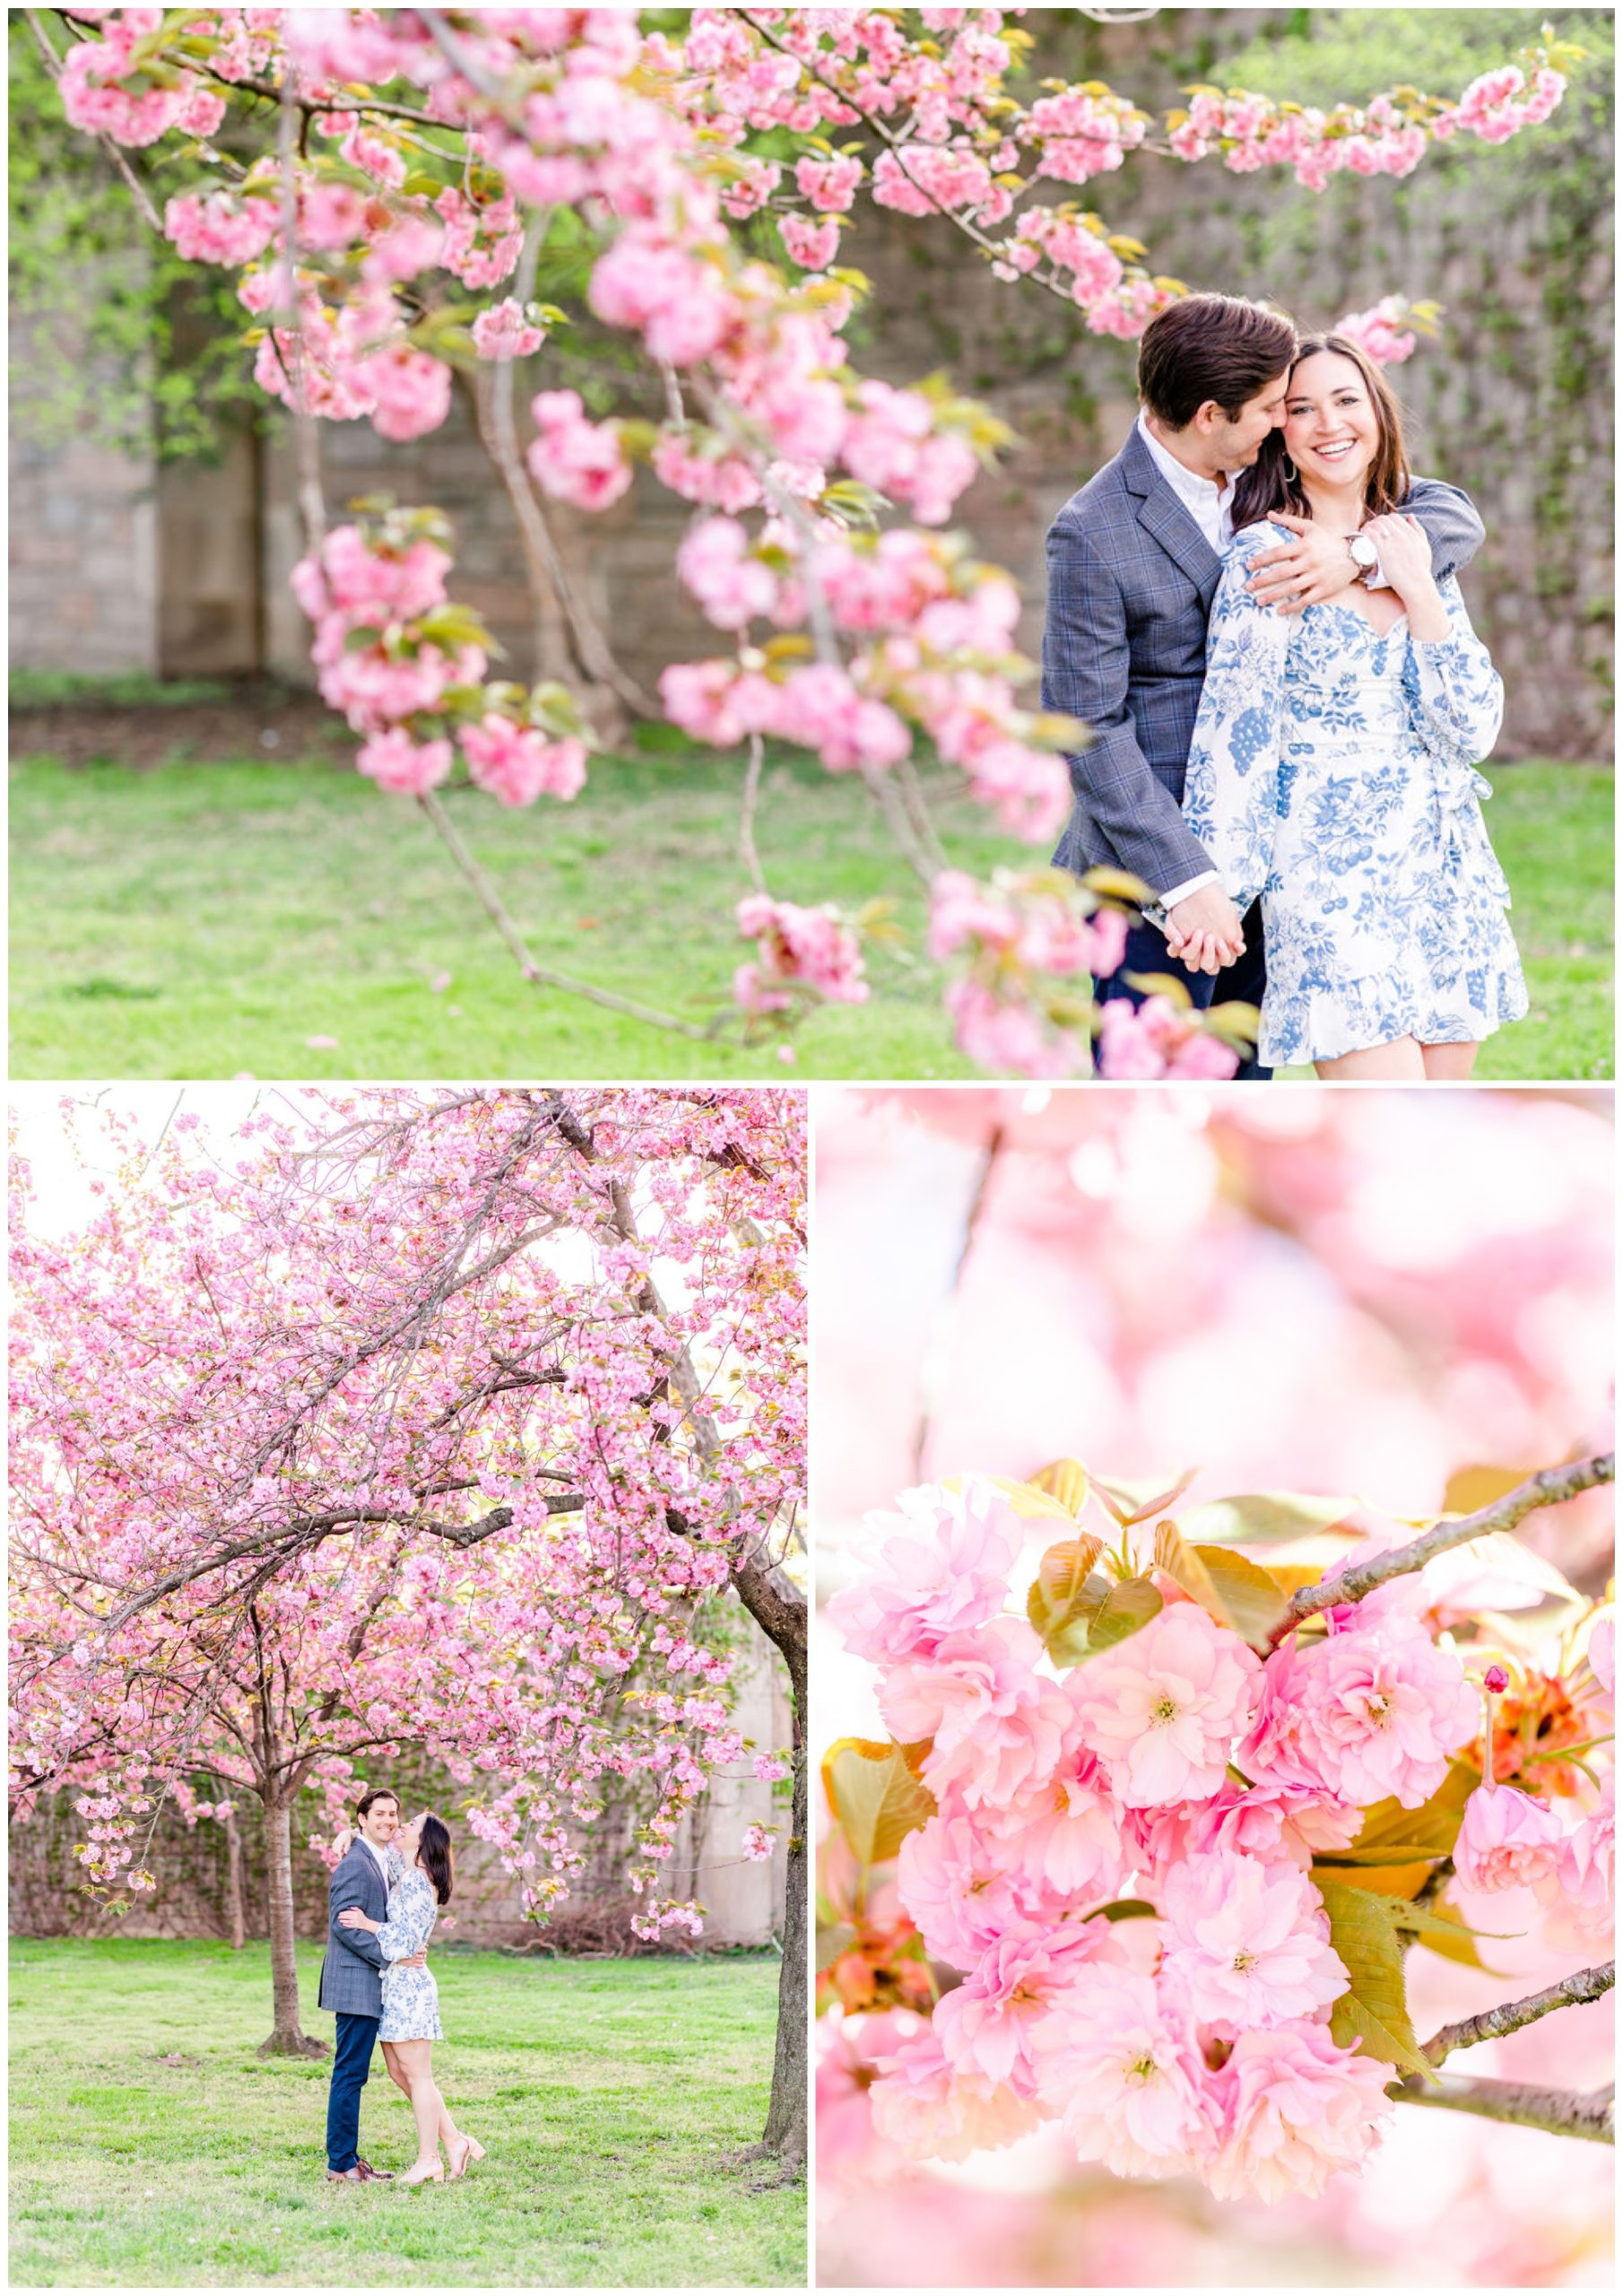 kwanzan cherry blossom photos, D.C. cherry blossoms, alternative cherry blossoms, flowering trees, bright pink blossoms, fluffy pink blossoms, spring portraits, spring photo ideas, Rachel E.H. Photography, man hugging woman from behind, couple behind cherry blossom branches, couple under cherry blossom tree, couple almost kissing